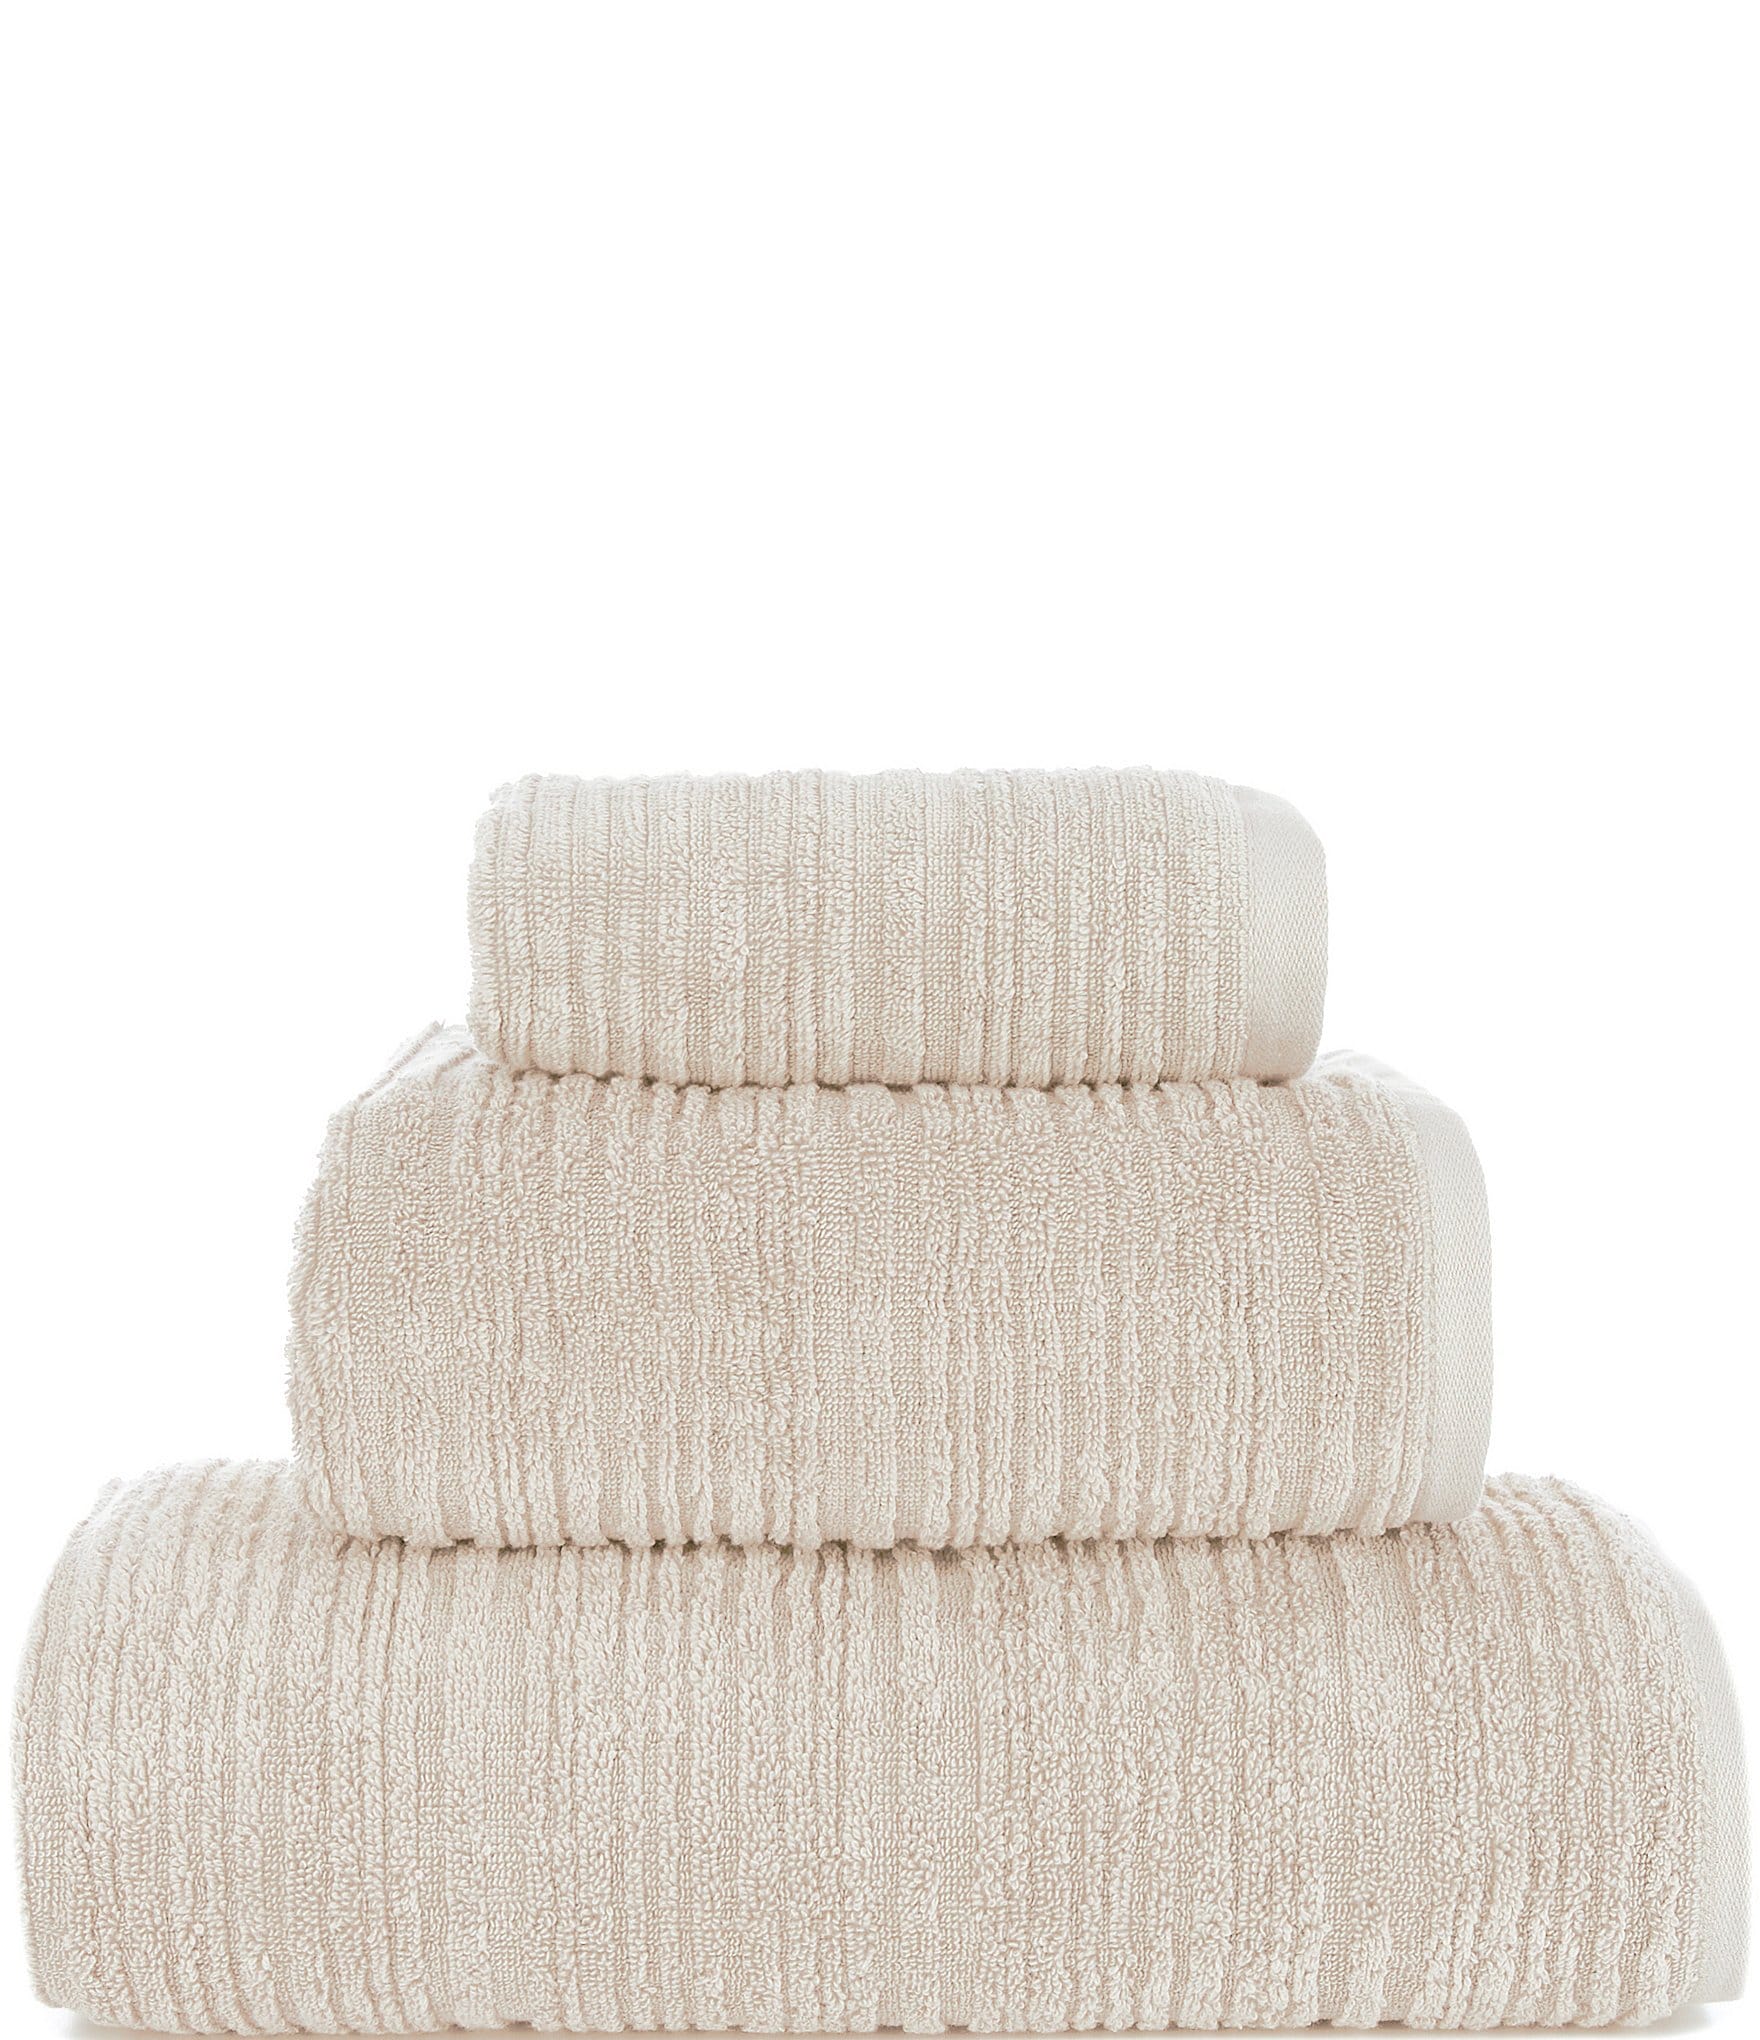 Luxury Cotton Bath Towels - Living Simply House